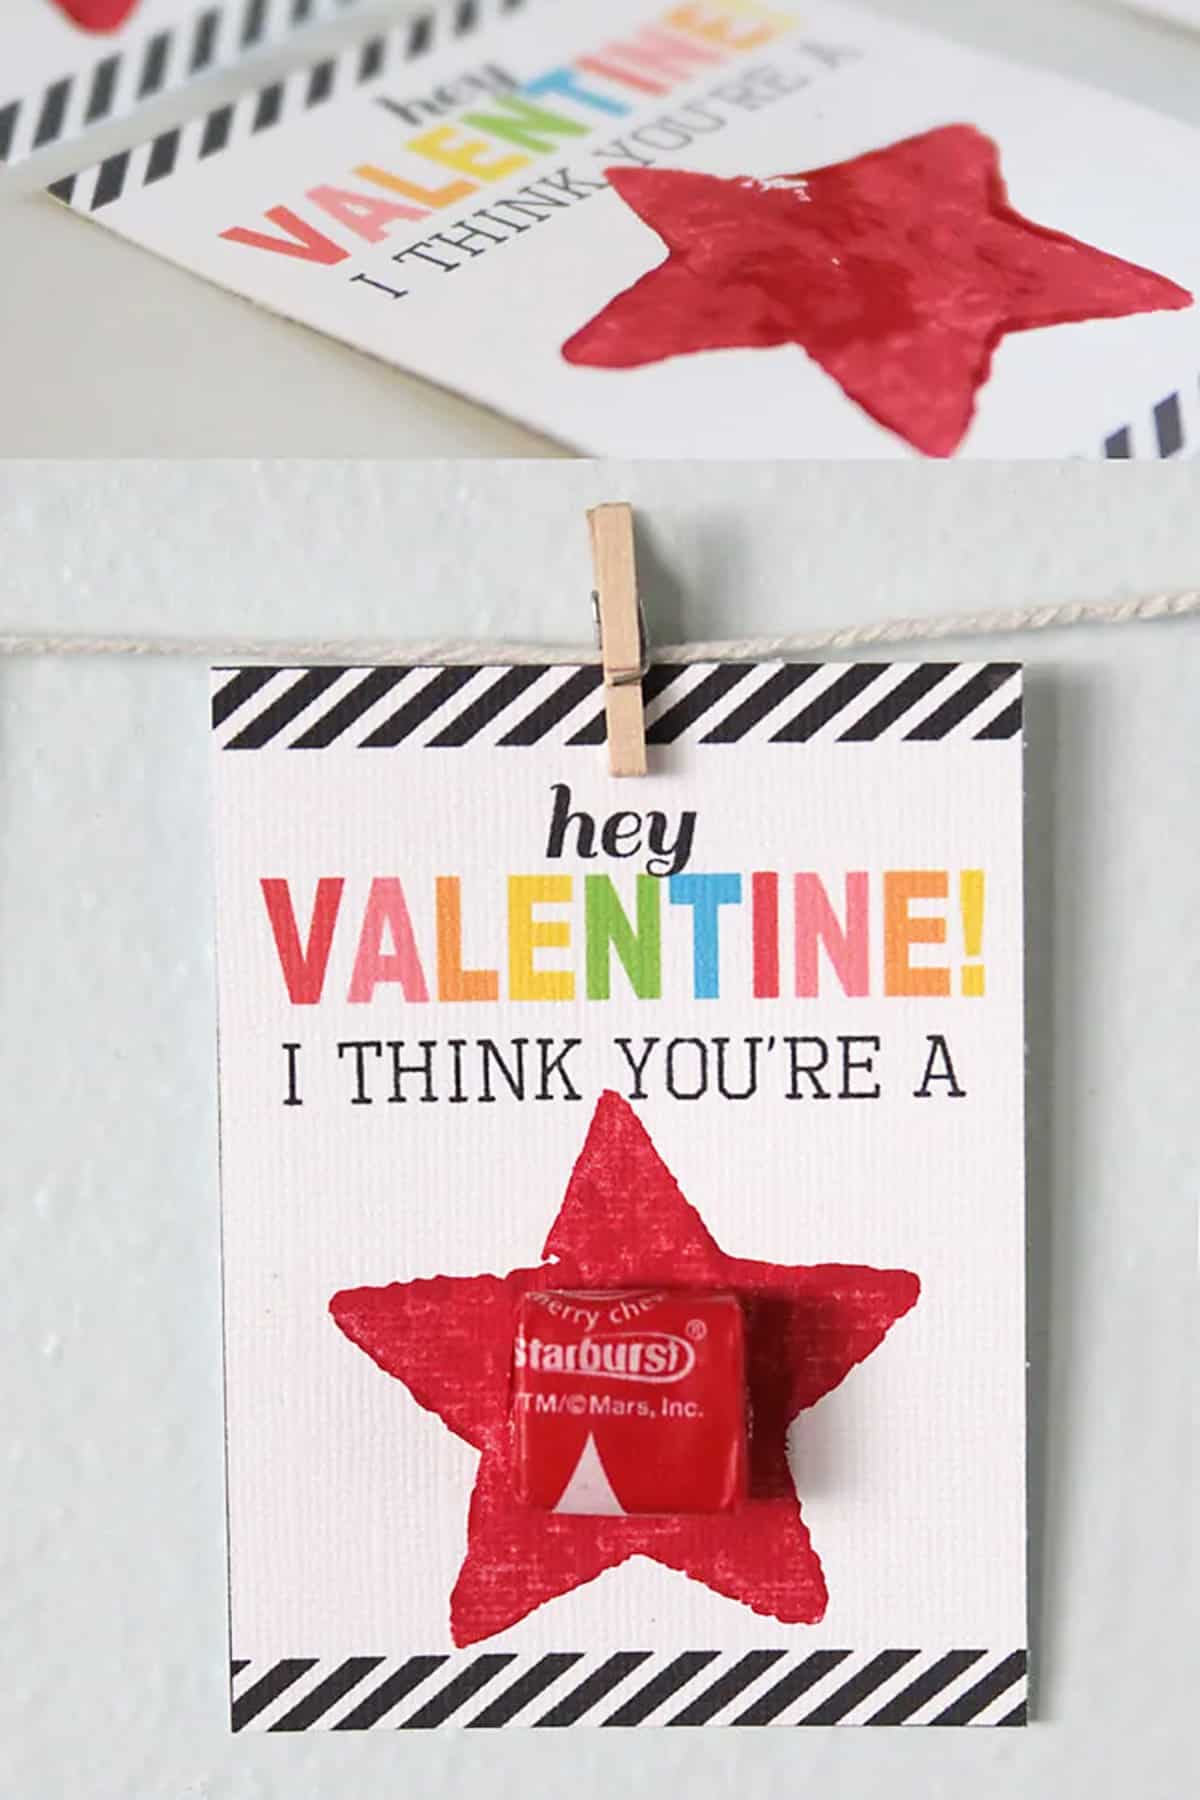 Starburst valentine's day craft for kids and card with a star stamp on it.